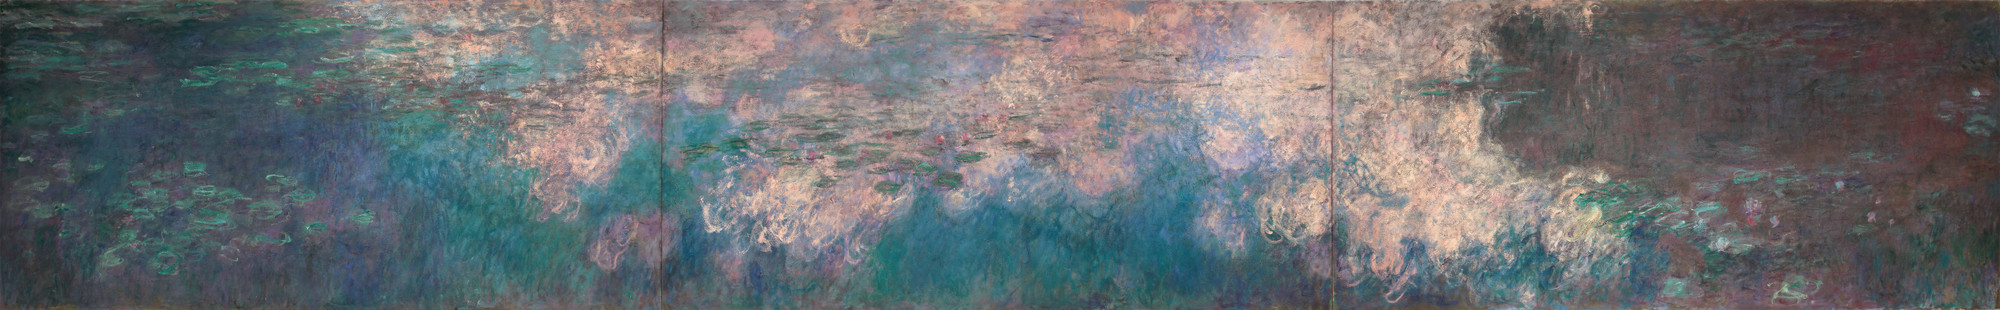 515: Claude Monet’s Water Lilies | MoMA